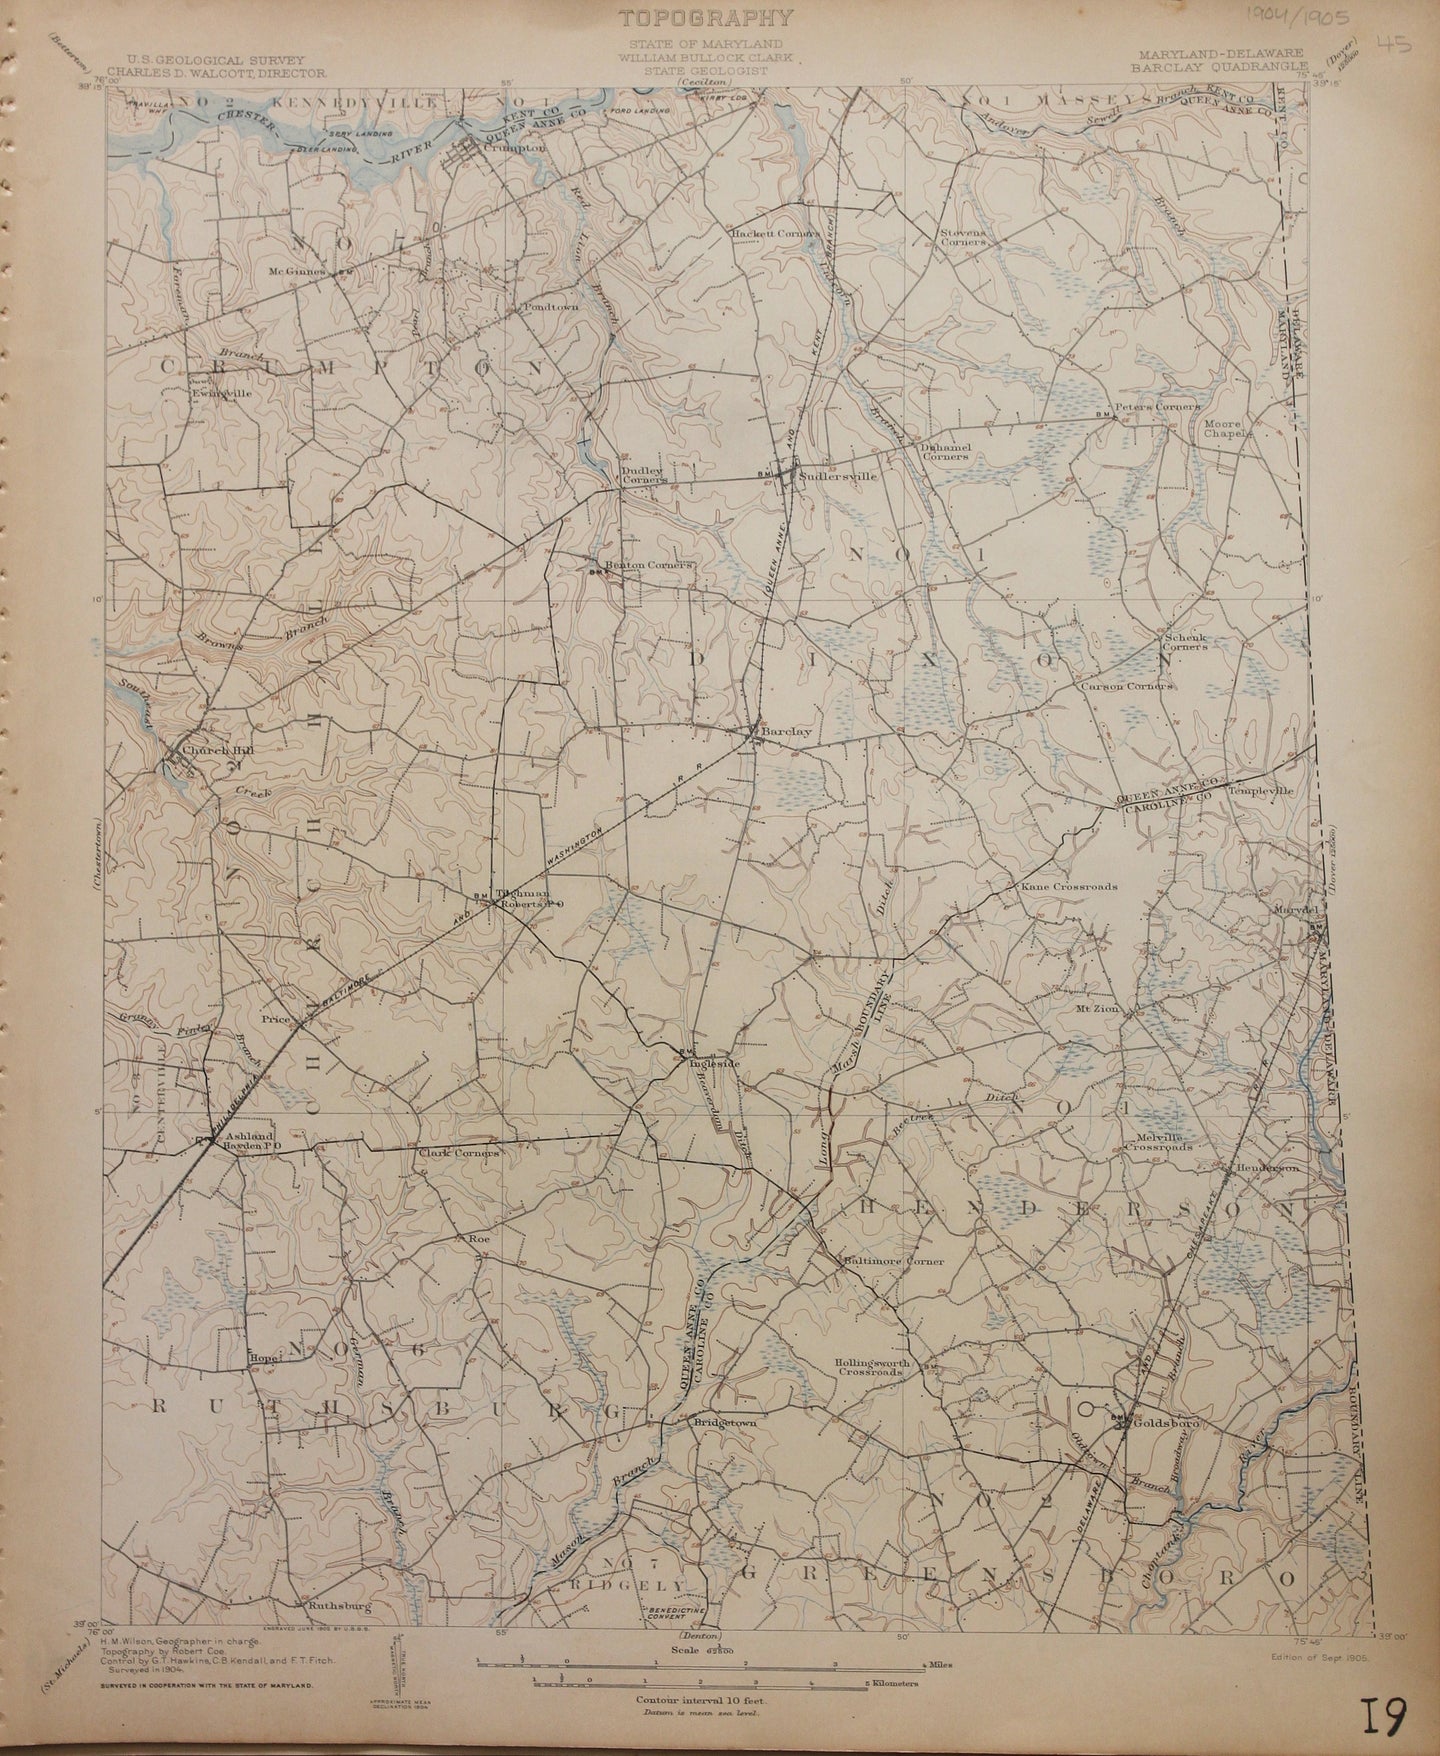 Genuine-Antique-Map-Barclay-Maryland-Delaware--1905-U-S-Geological-Survey--Maps-Of-Antiquity